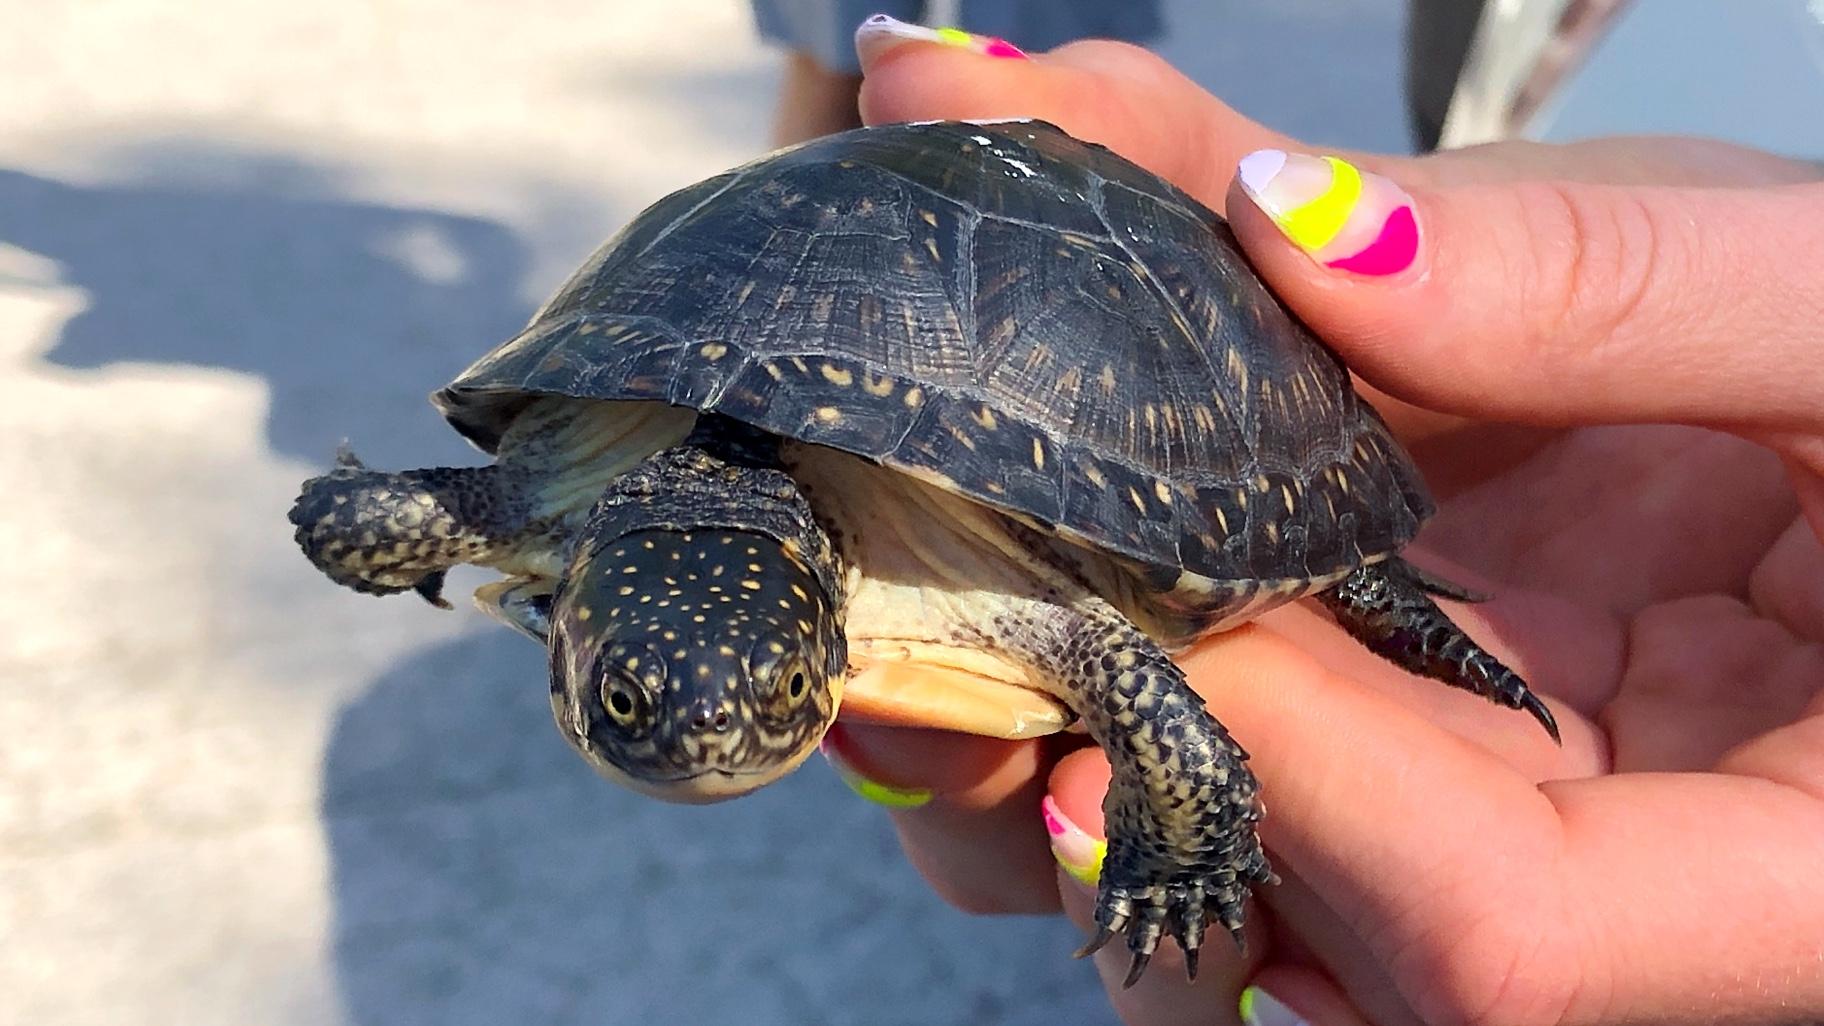 A Blanding’s juvenile turtle reared in a “head start” program and released into the wild. (Patty Wetli / WTTW News)